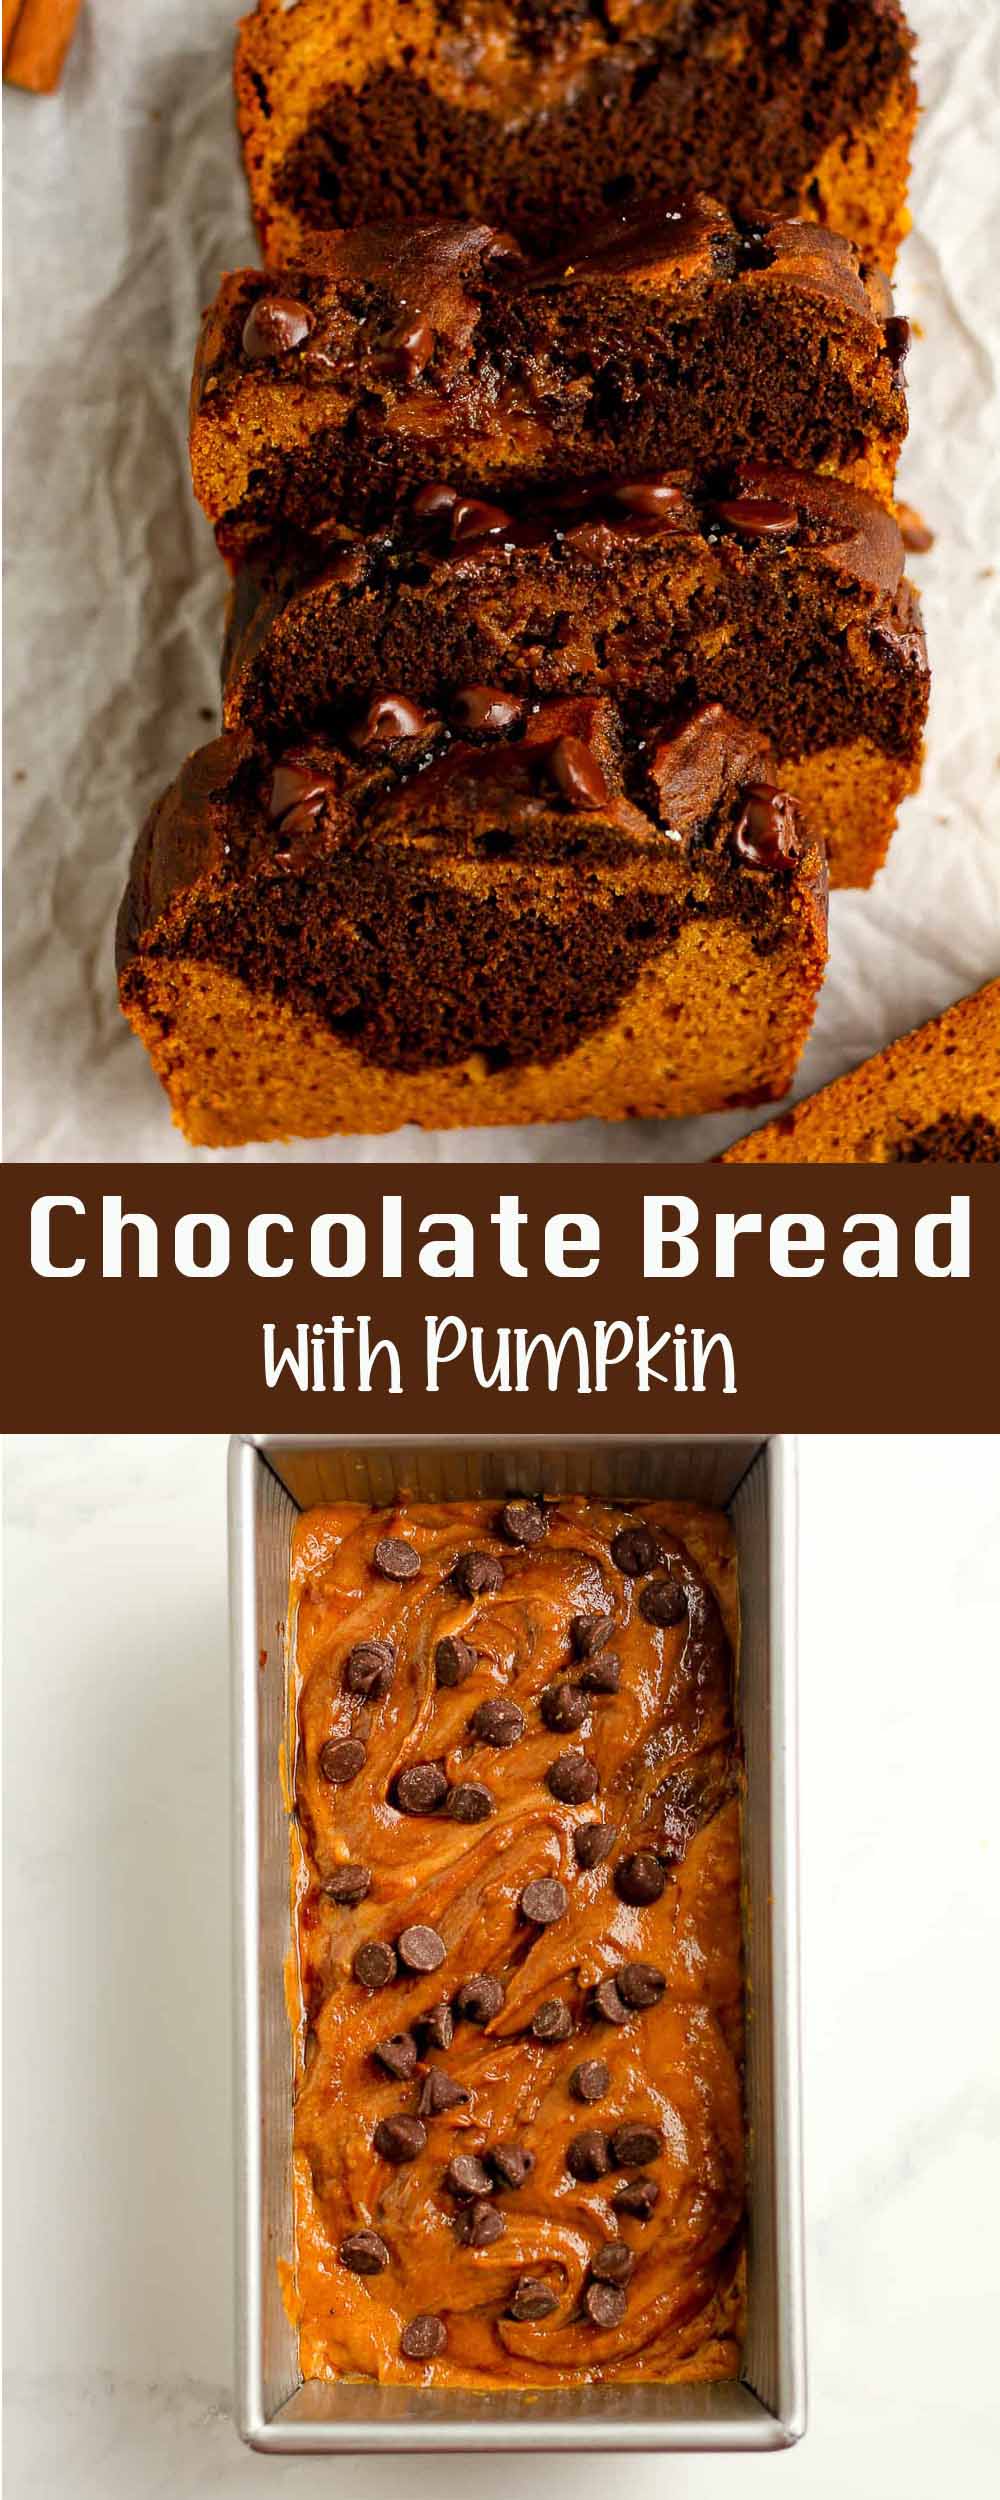 Two photos - one of the sliced chocolate bread with pumpkin and another of the batter in the loaf pan.